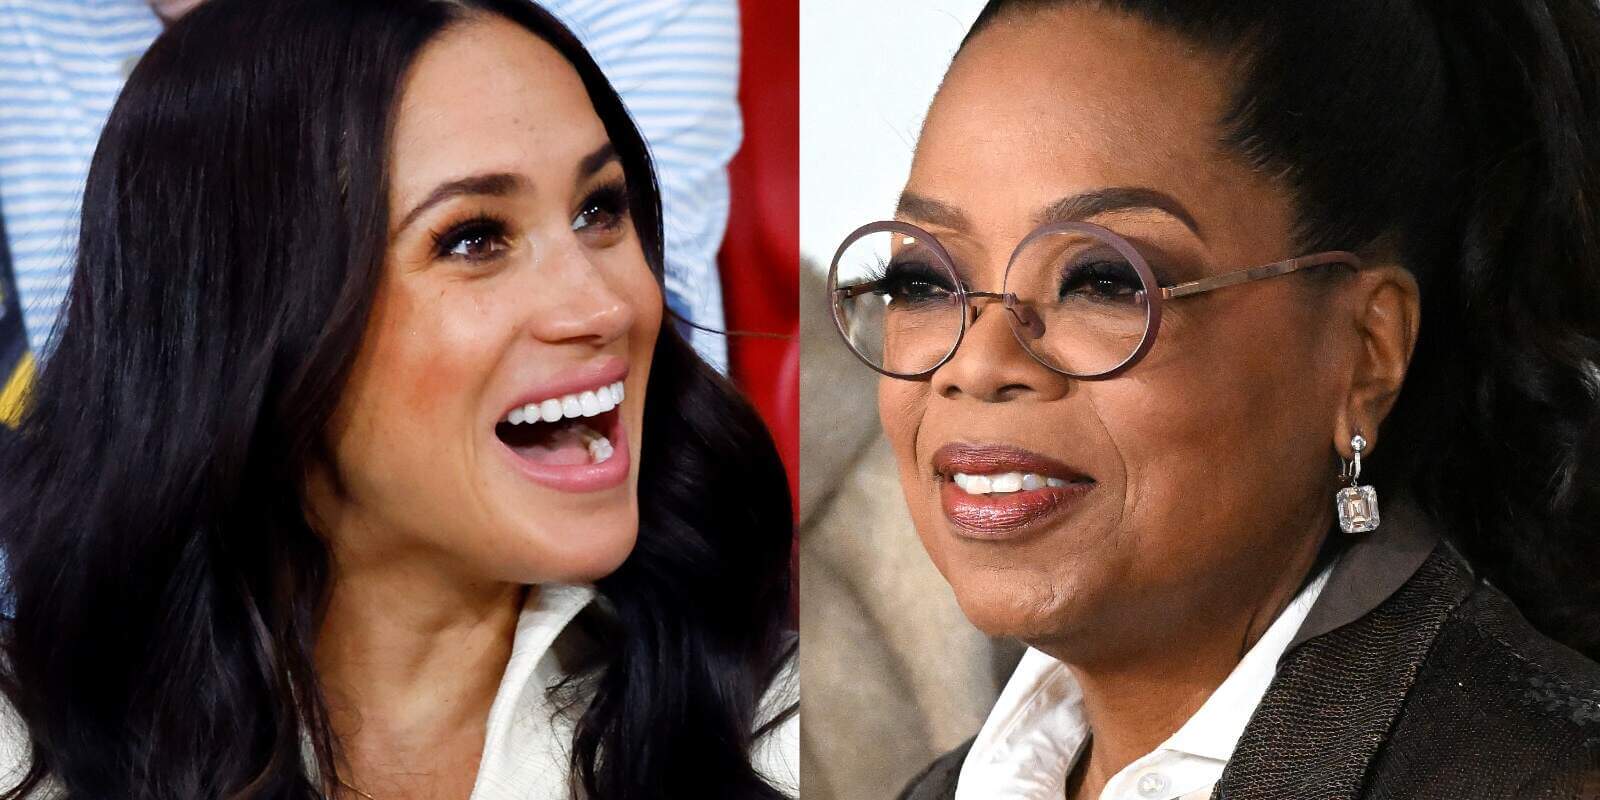 Meghan Markle and Oprah Winfrey in side-by-side photographs.